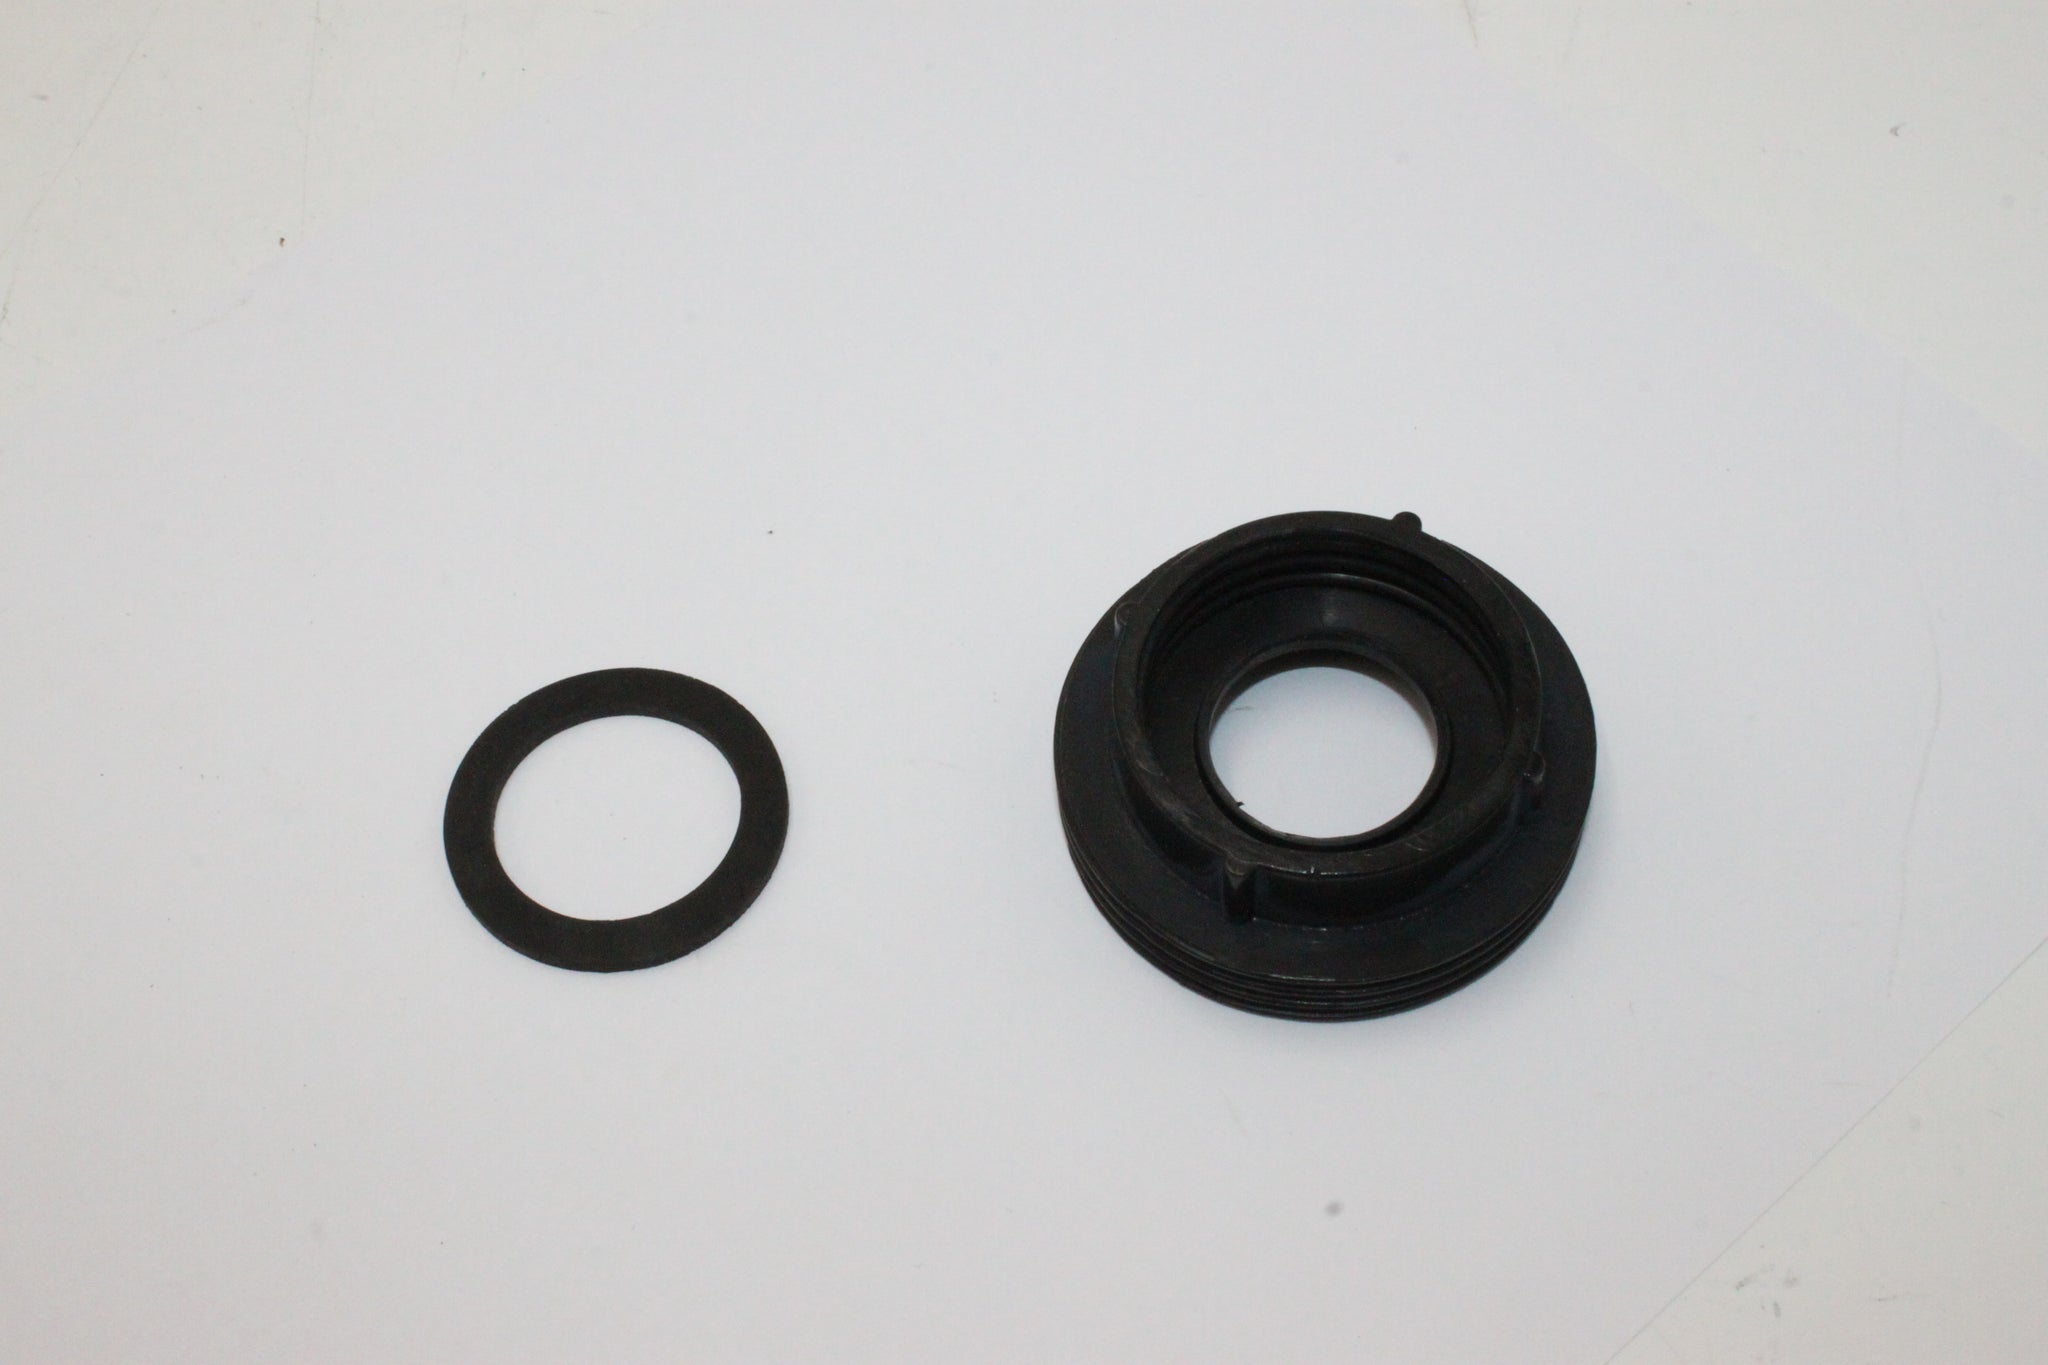 60mm To 40mm Gas Mask Filter Adapter